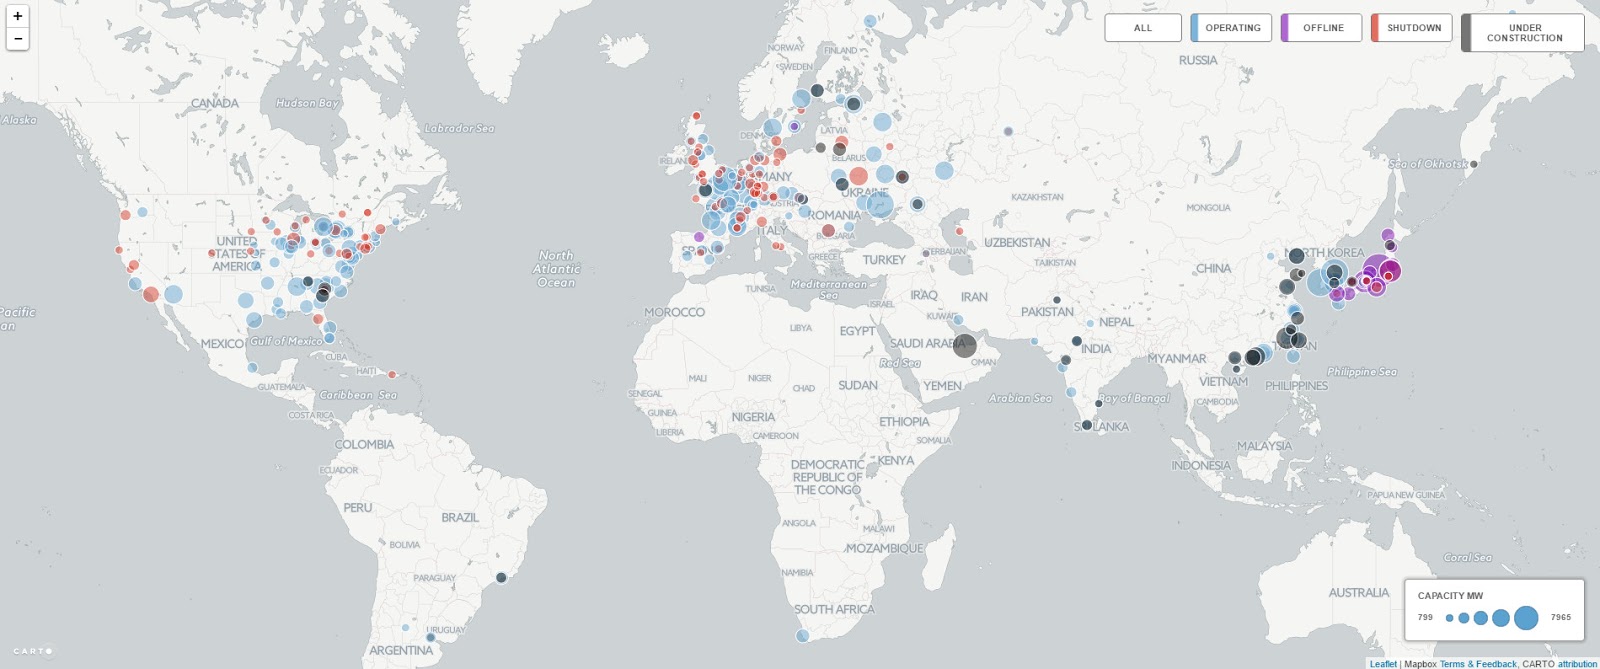 The world’s nuclear power plants mapped